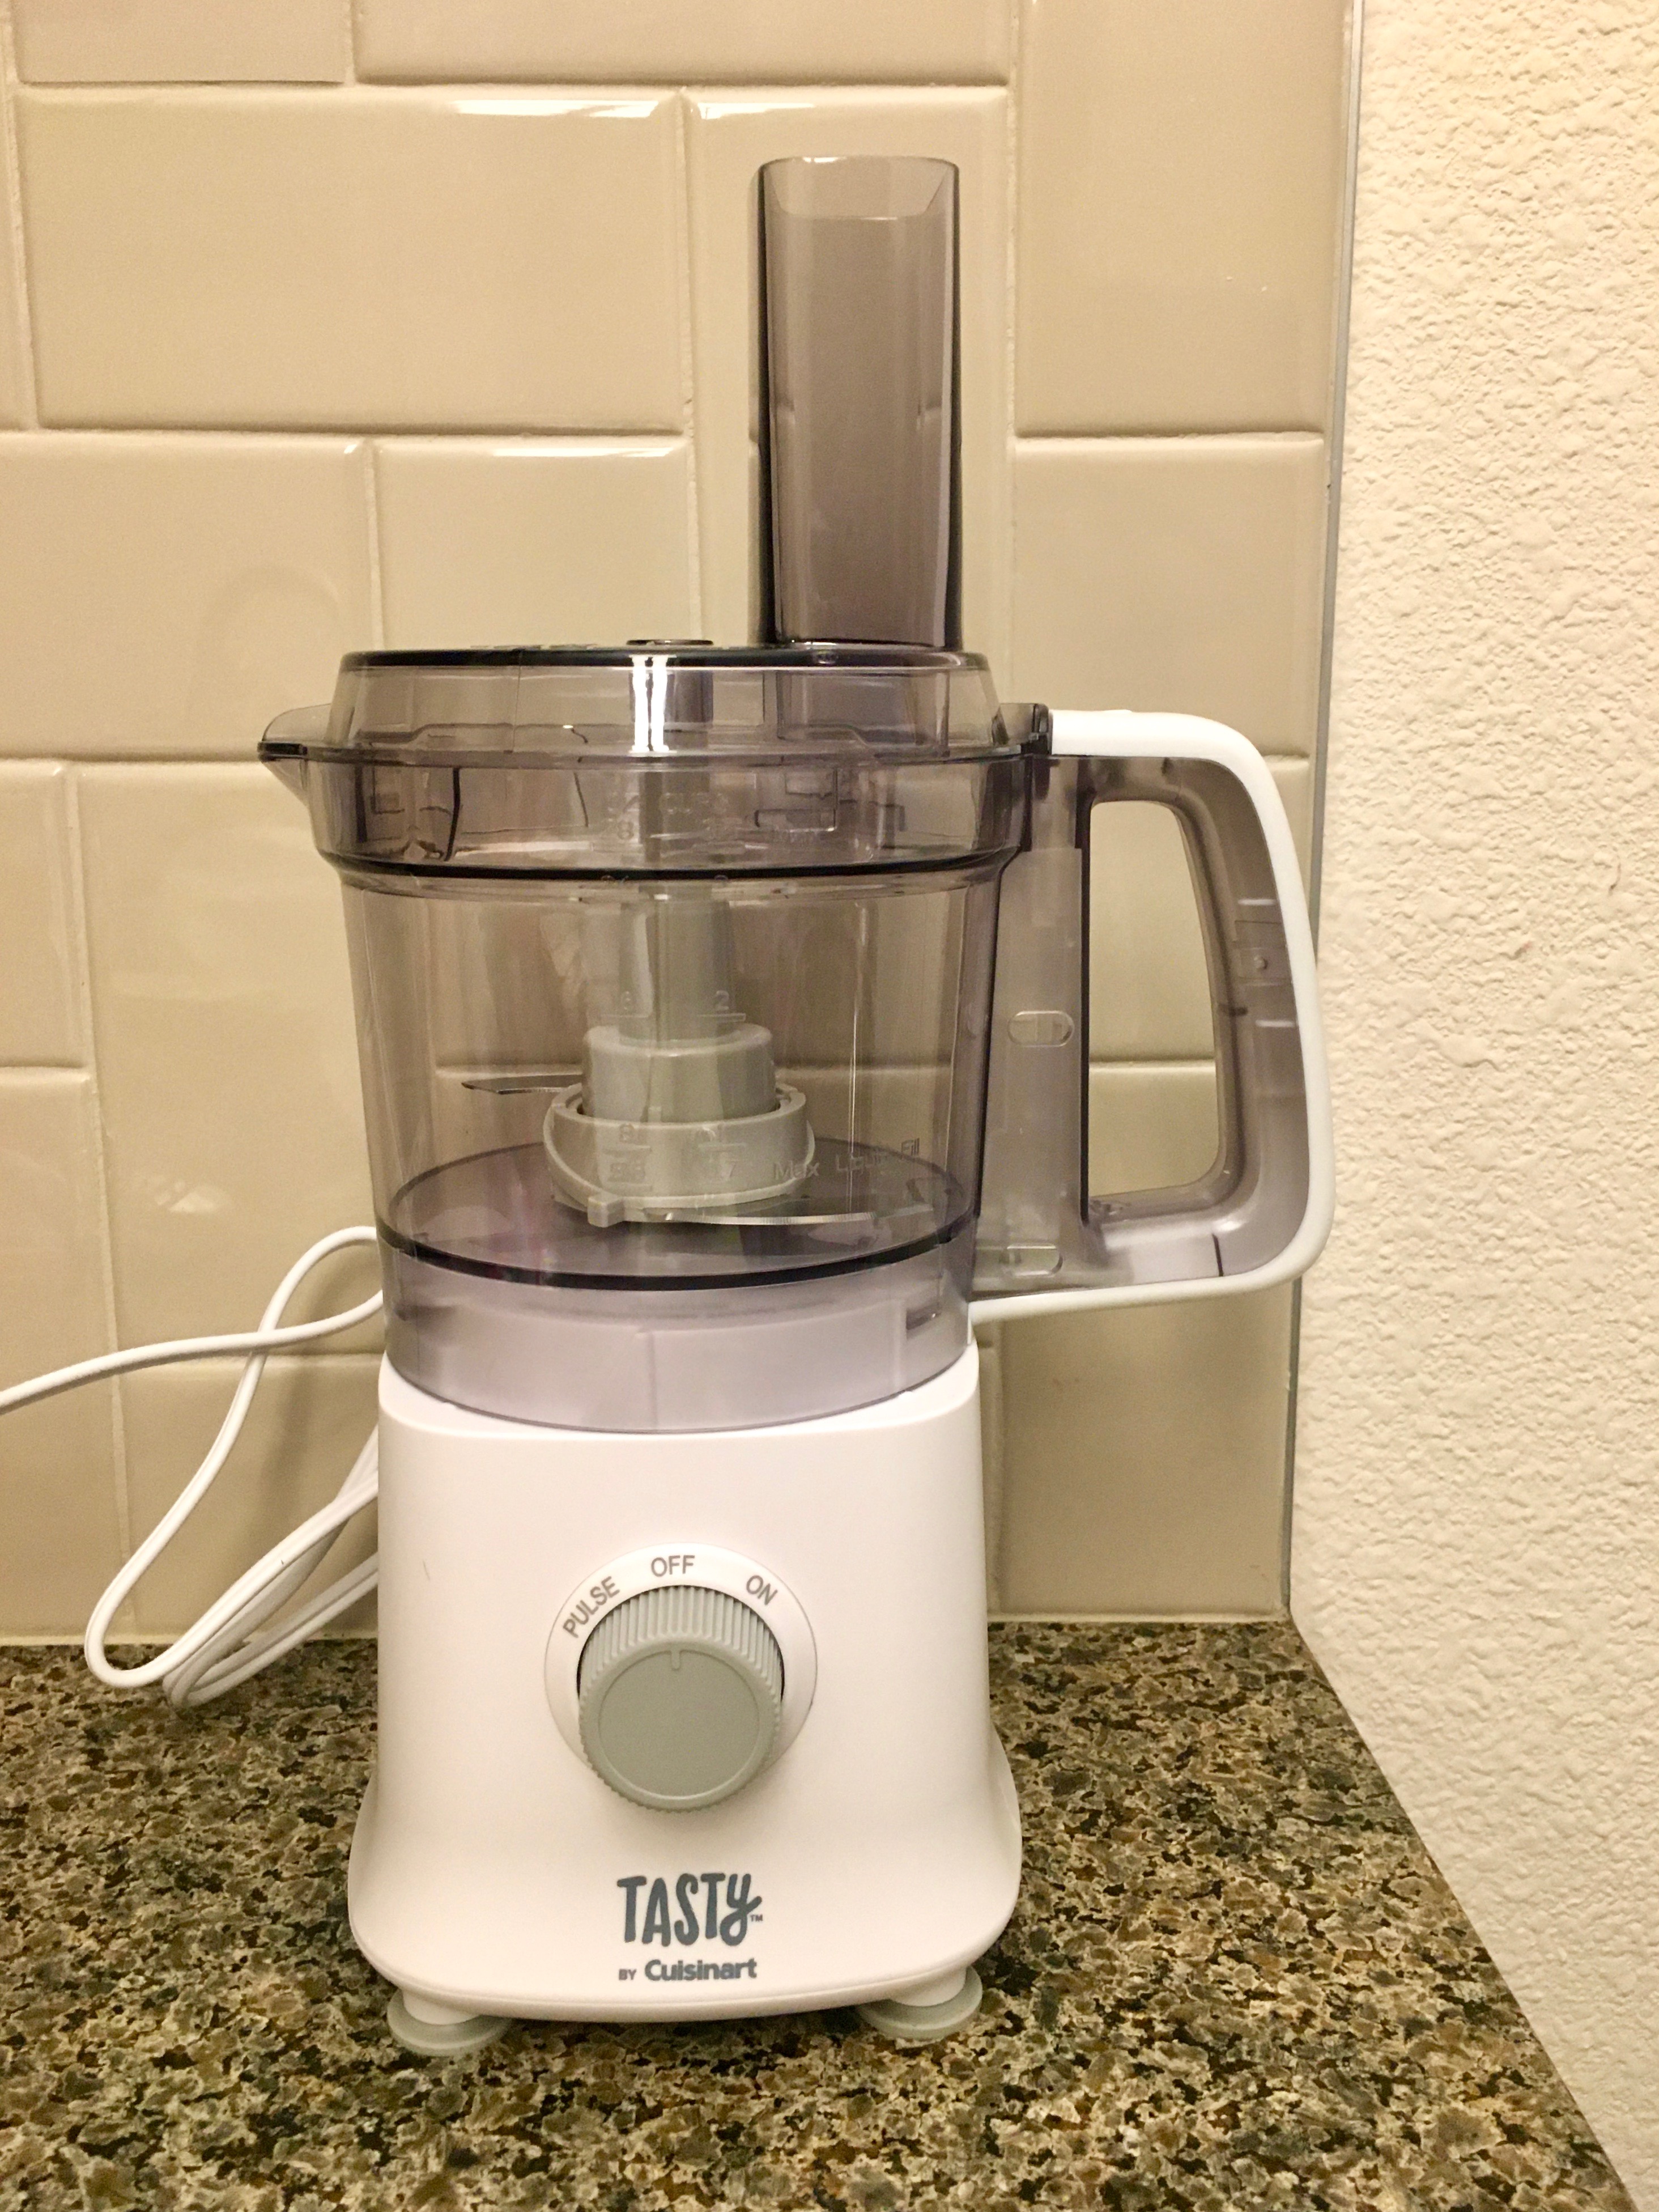 Mini Choppers/Food Processors - Kitchen Consumer - eGullet Forums